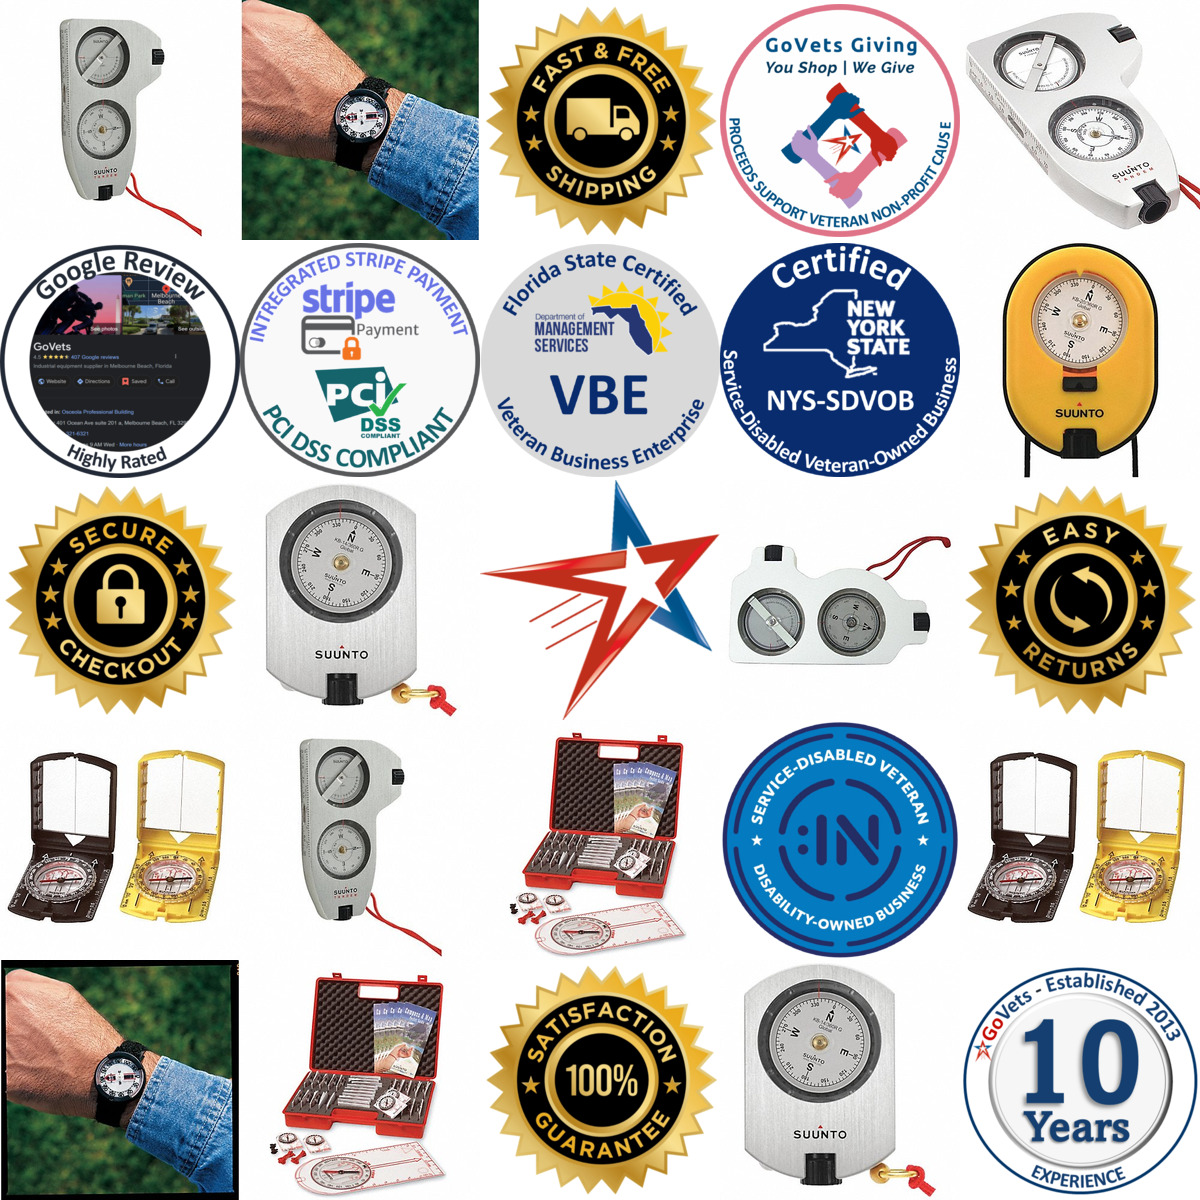 A selection of Sighting Compasses products on GoVets